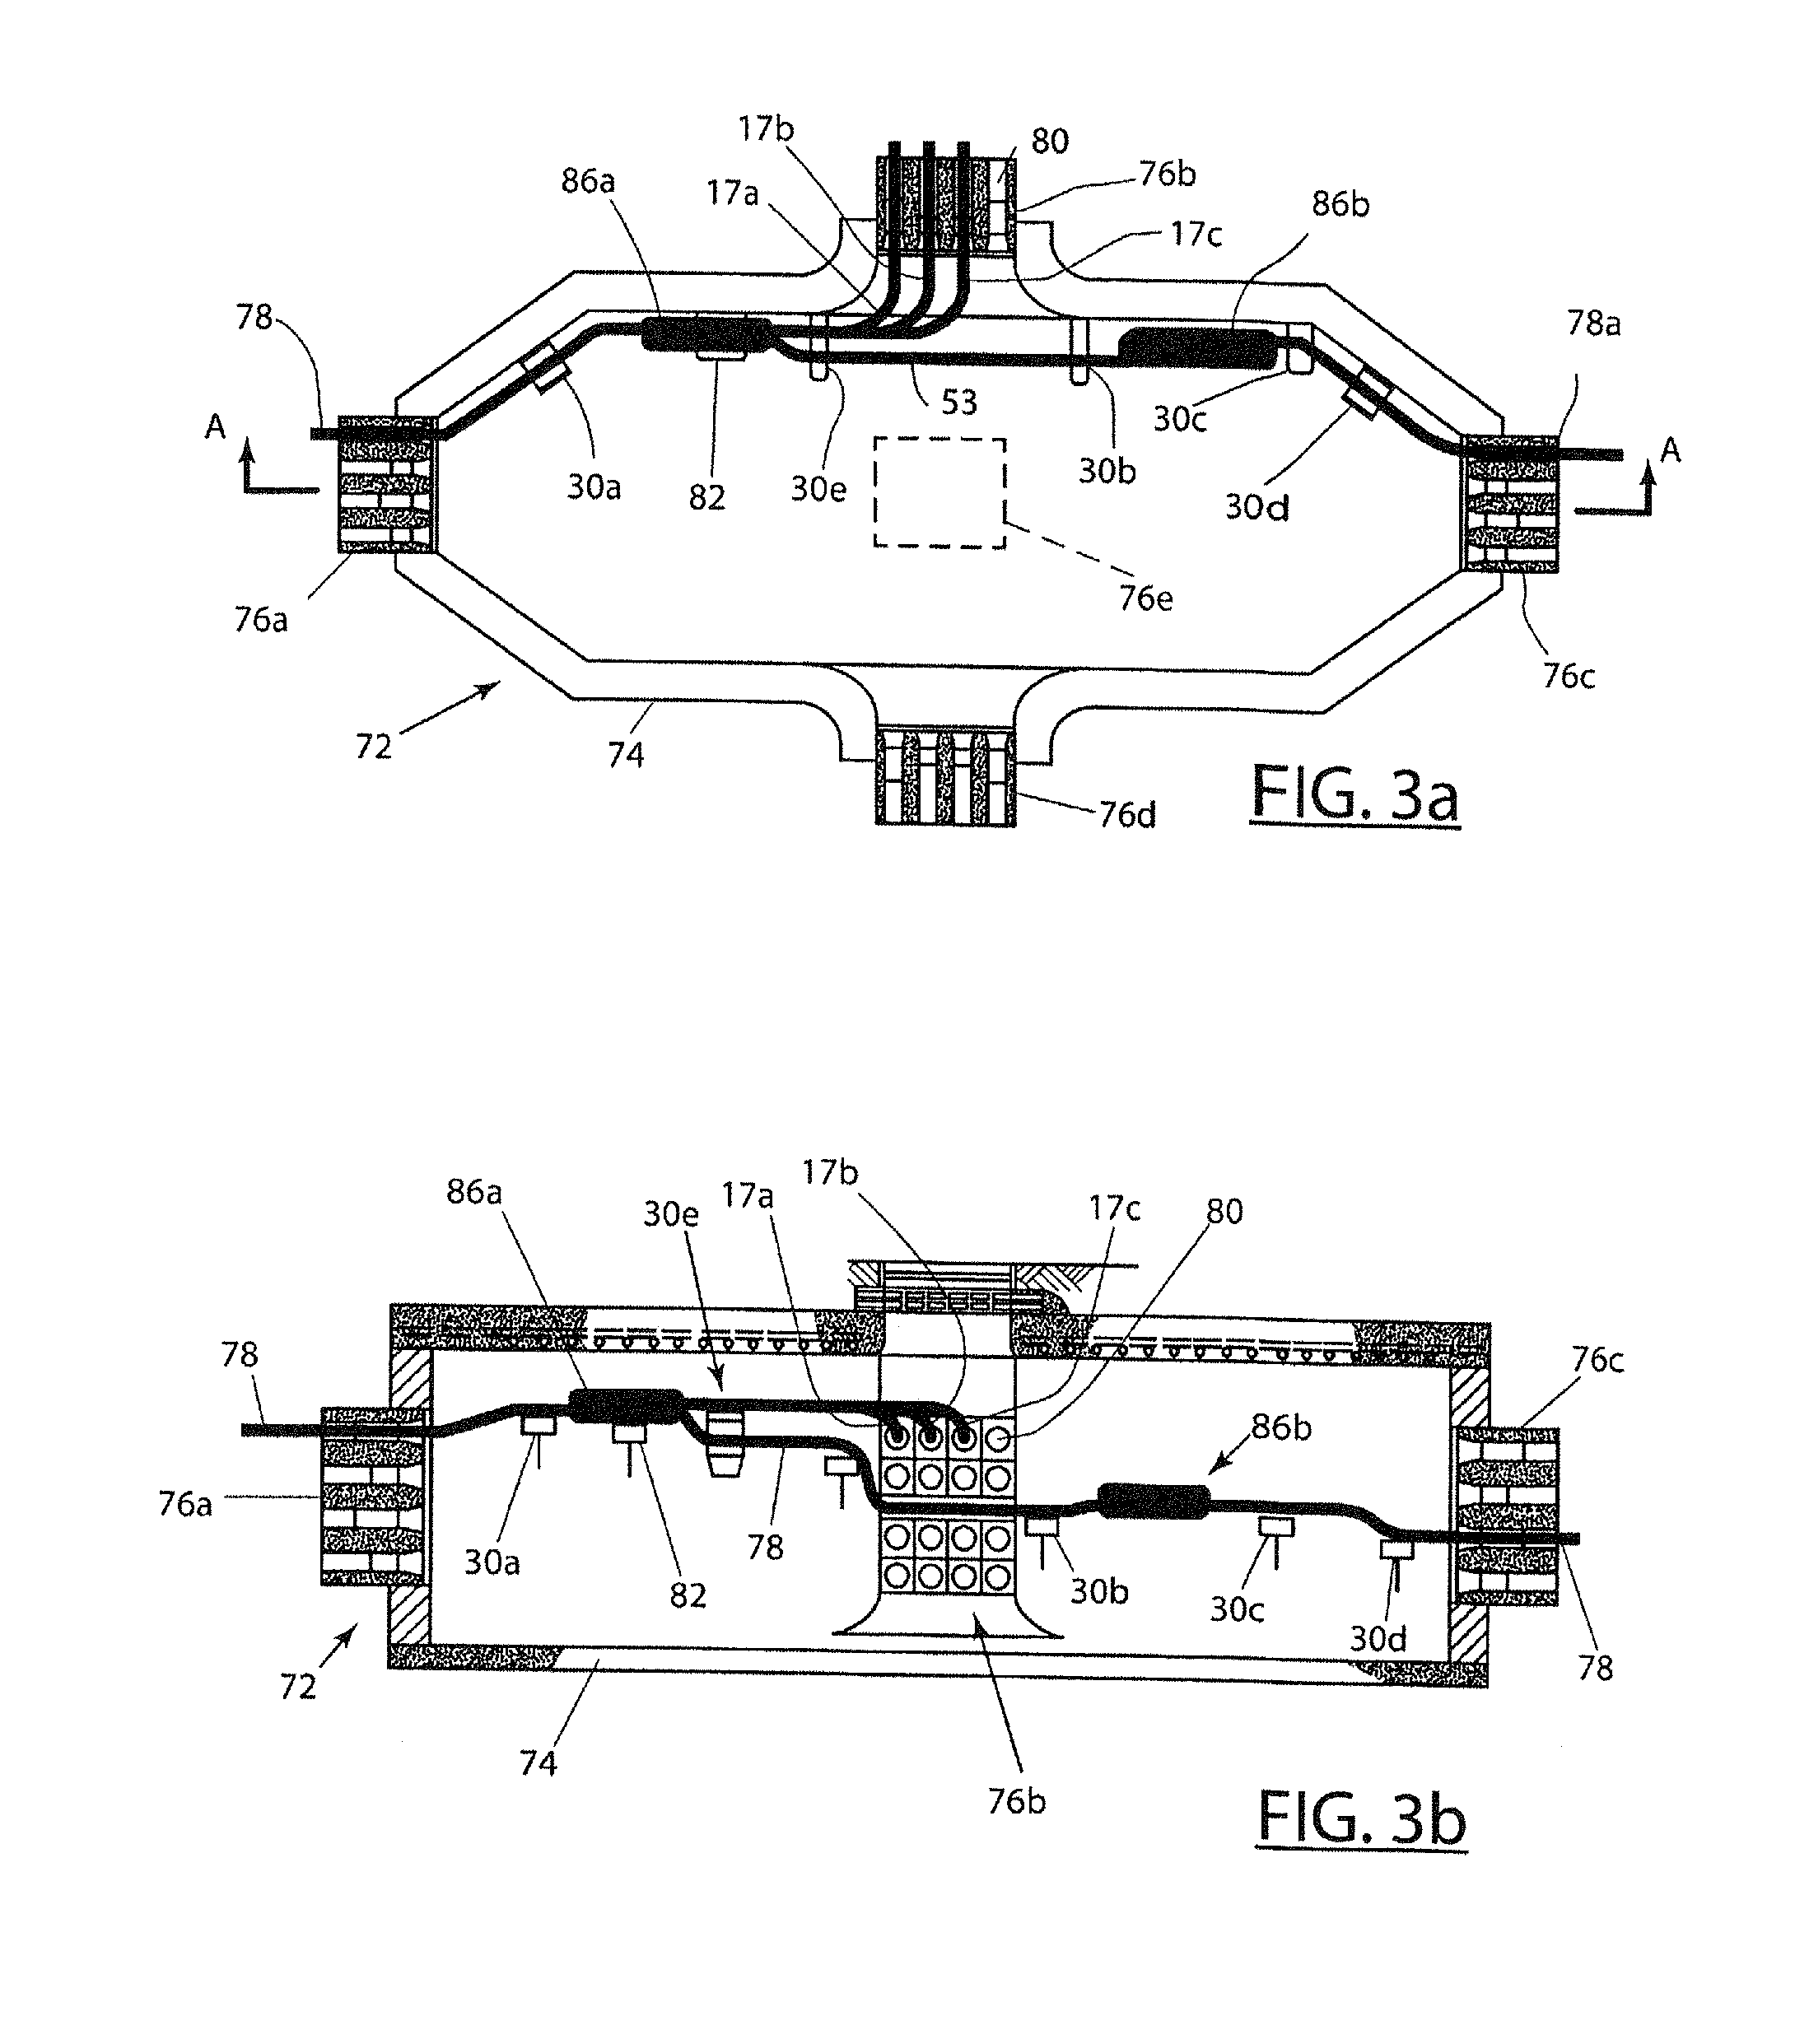 Electrical cable support arrangement